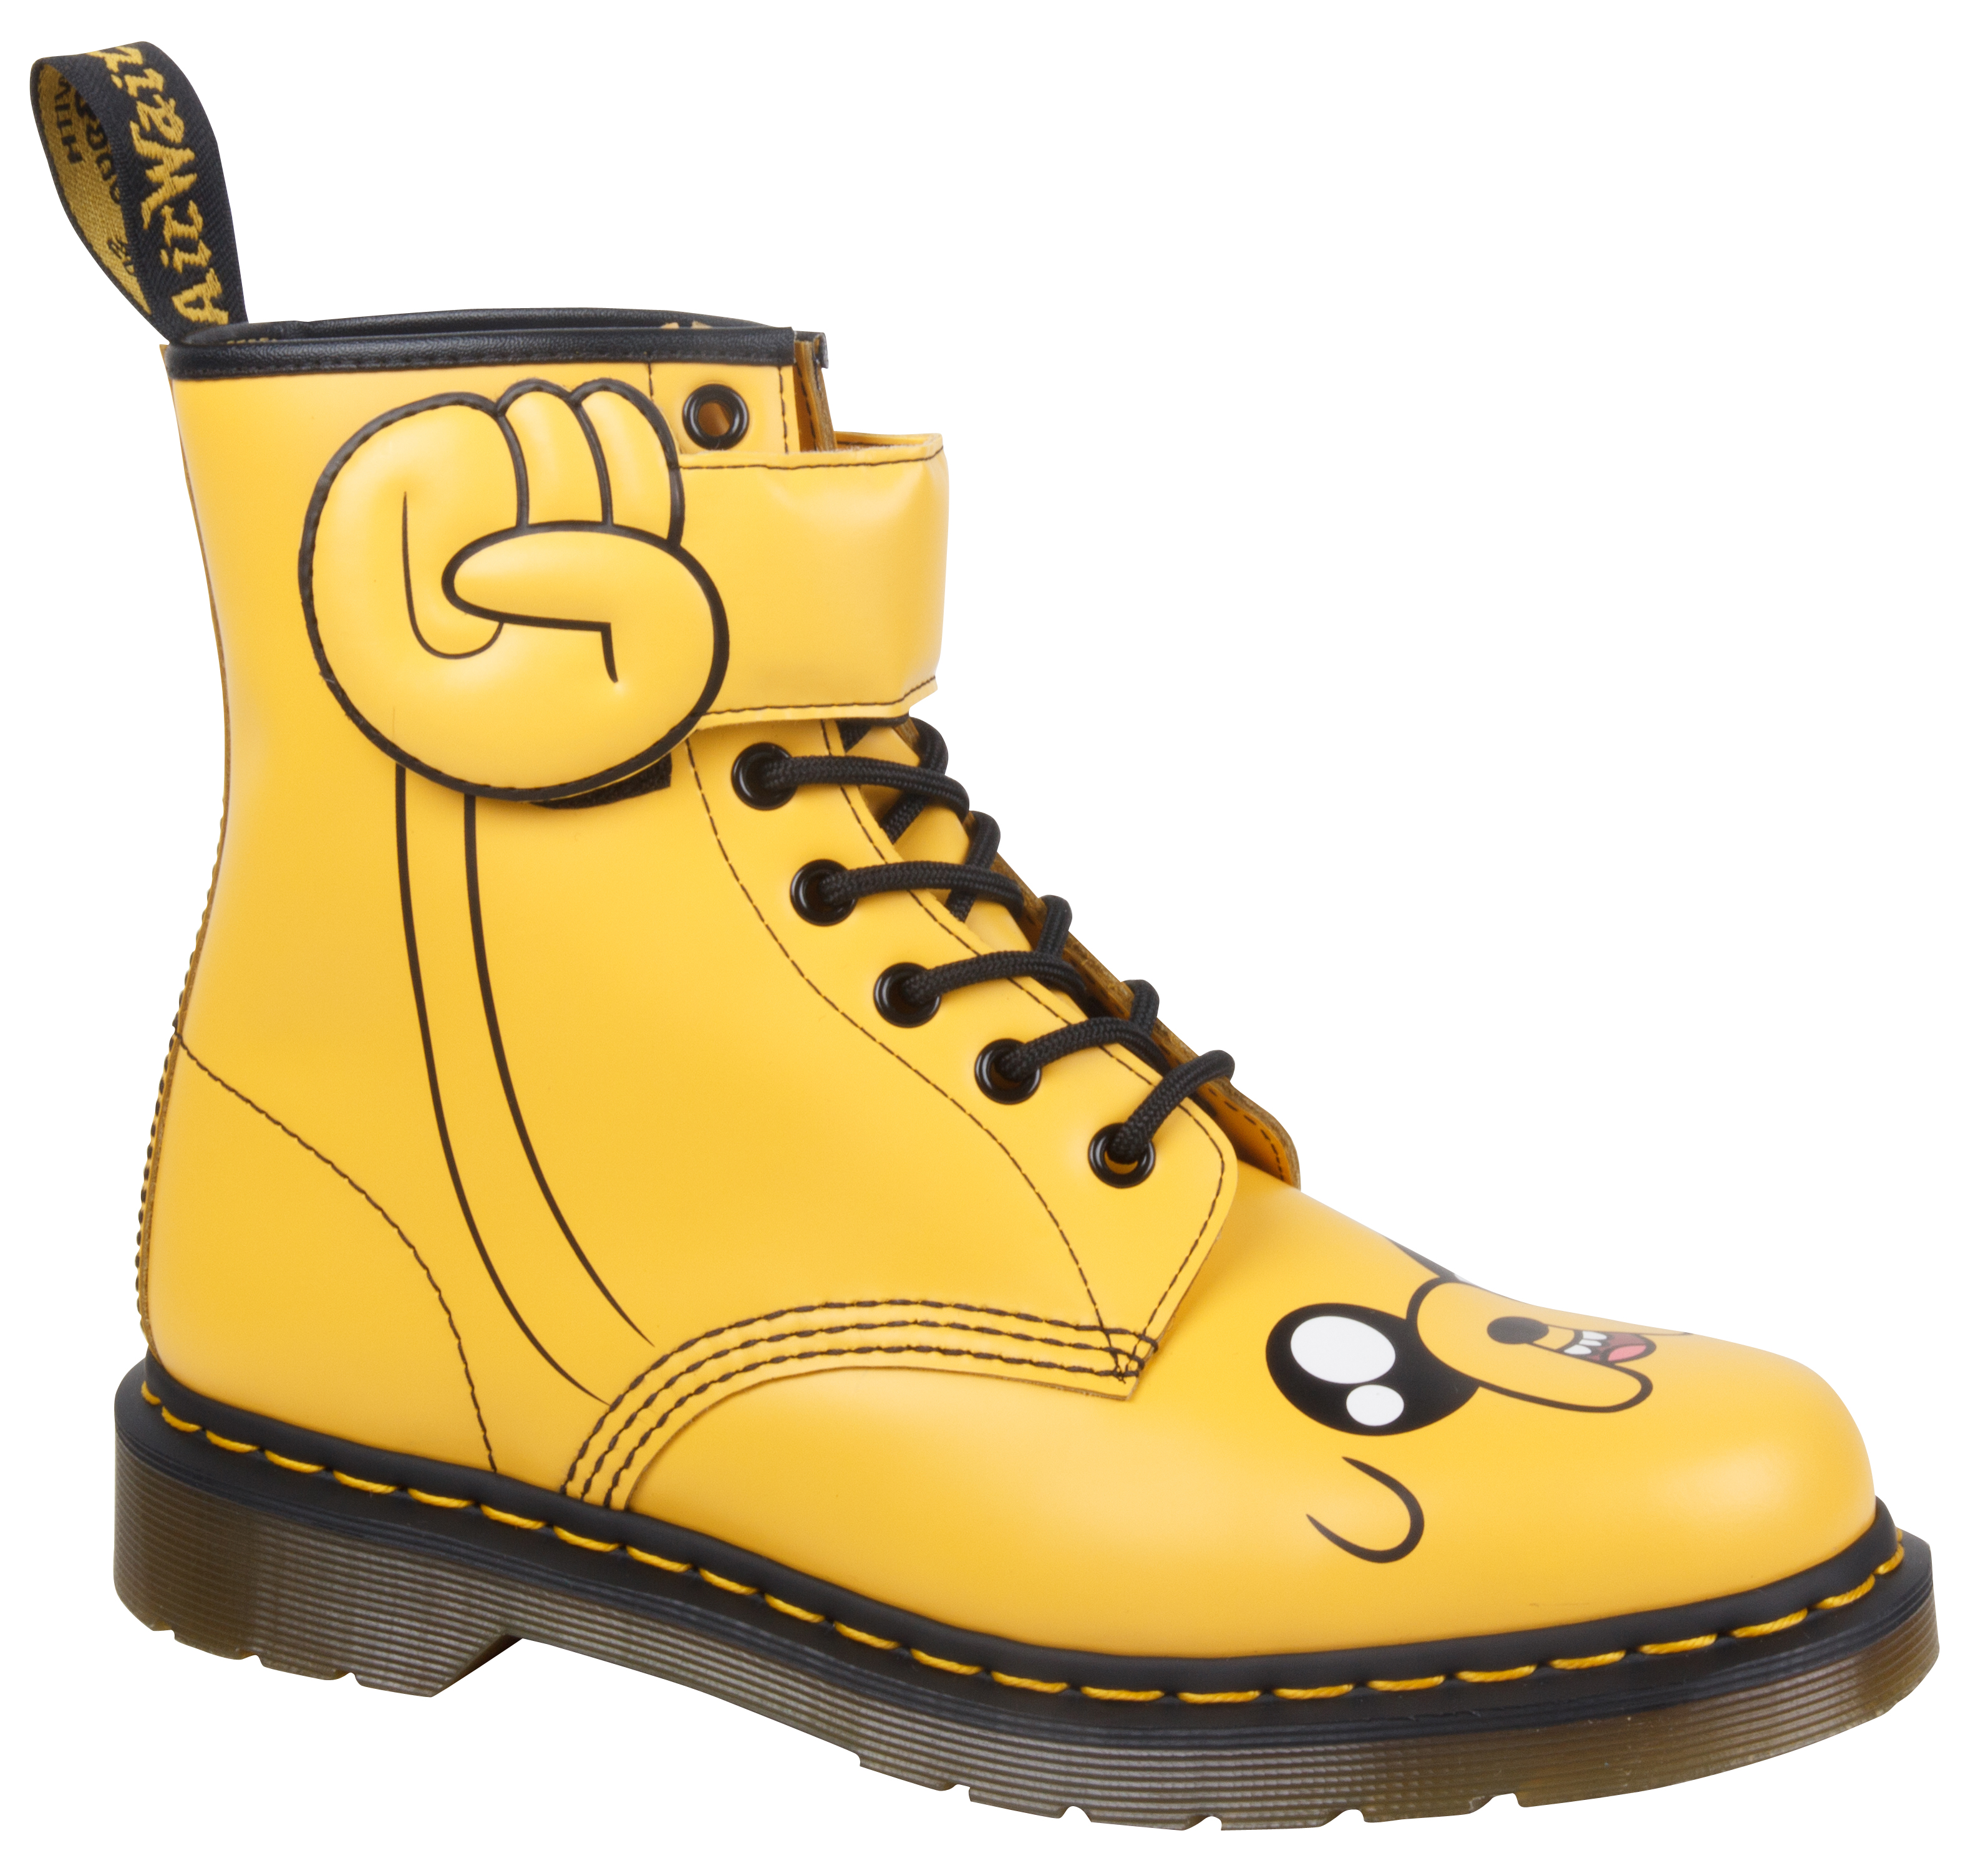 16683700_ADULTS_ADVENTURE TIME_JAKE BOOT_8 EYE STRAP BOOT_YELLOW SMOOTH+SYNTHETIC PU